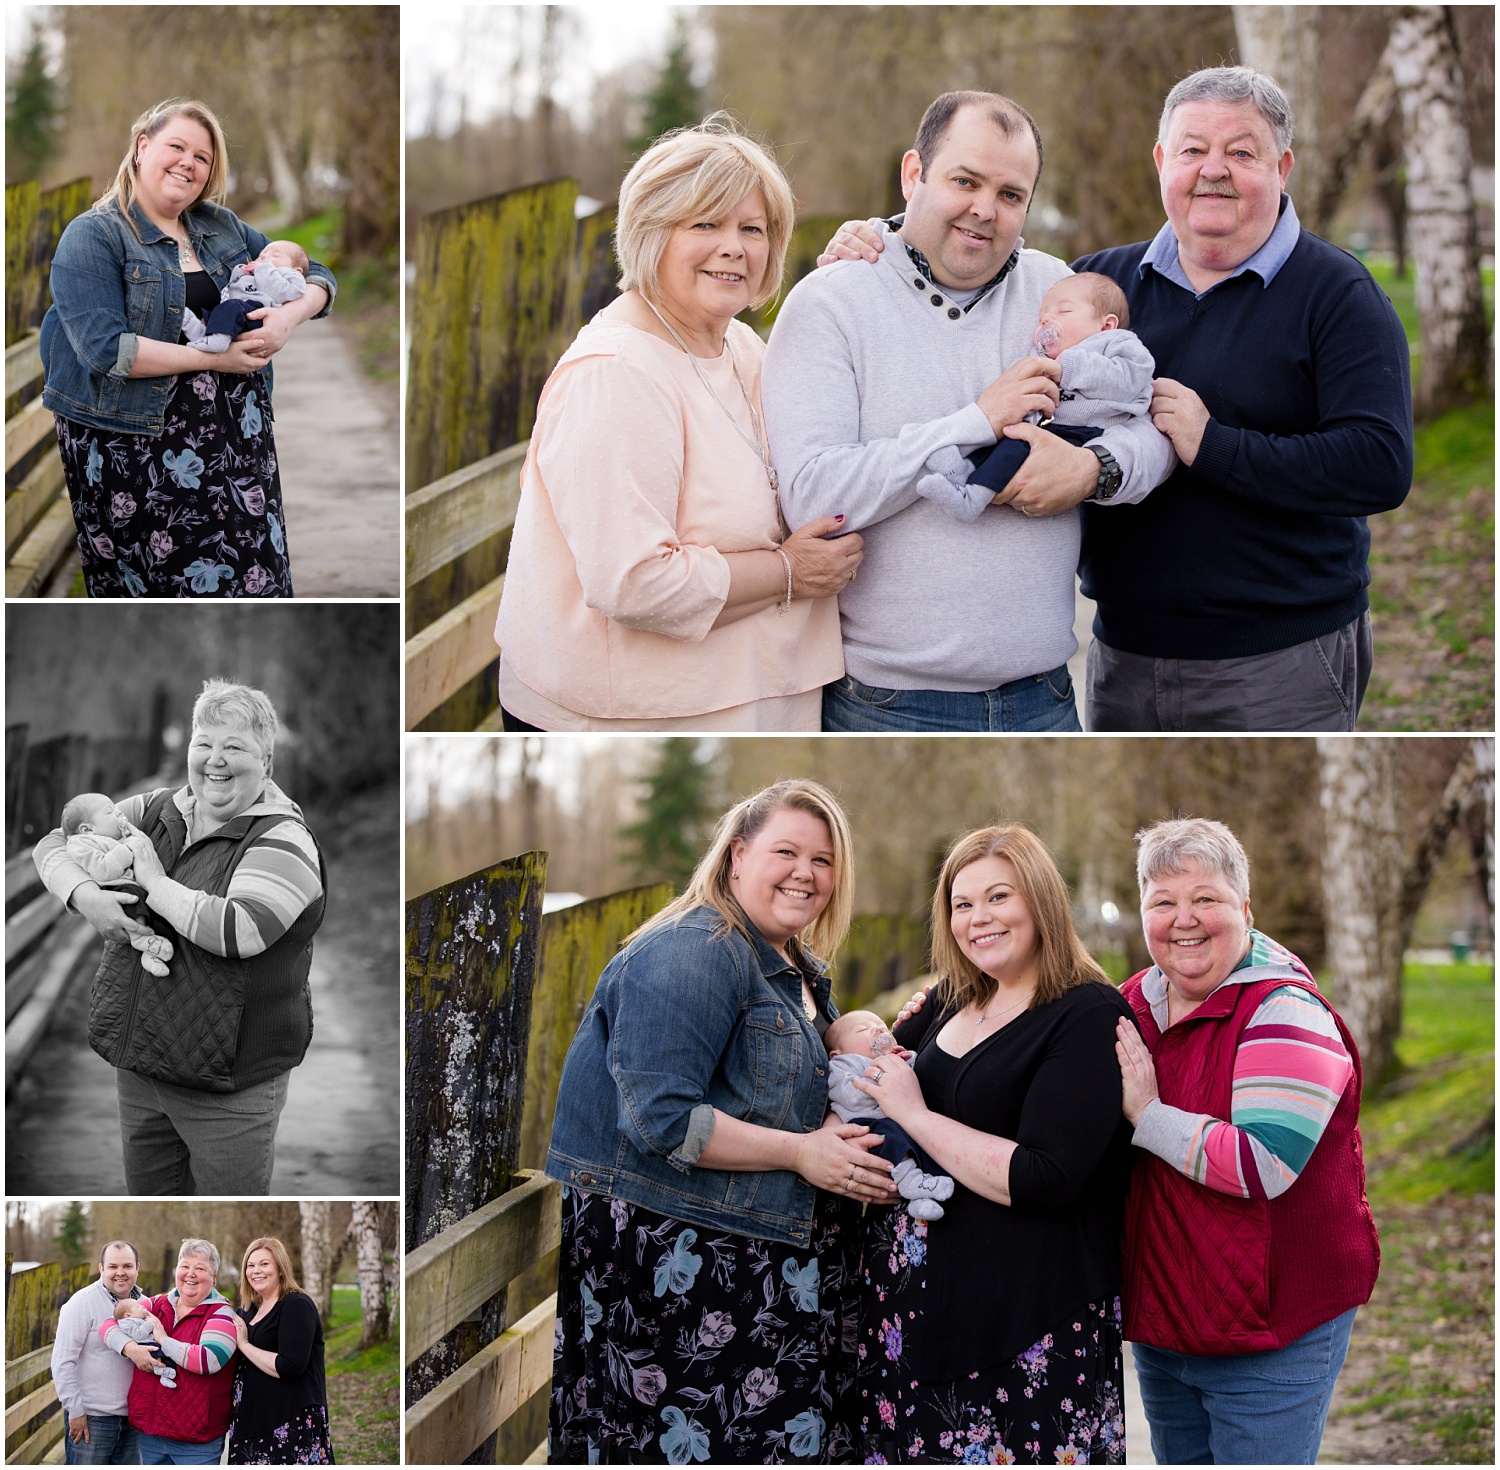 Amazing Day Photography - Fort Langley Family Session - Langley Family Photographer (8).jpg